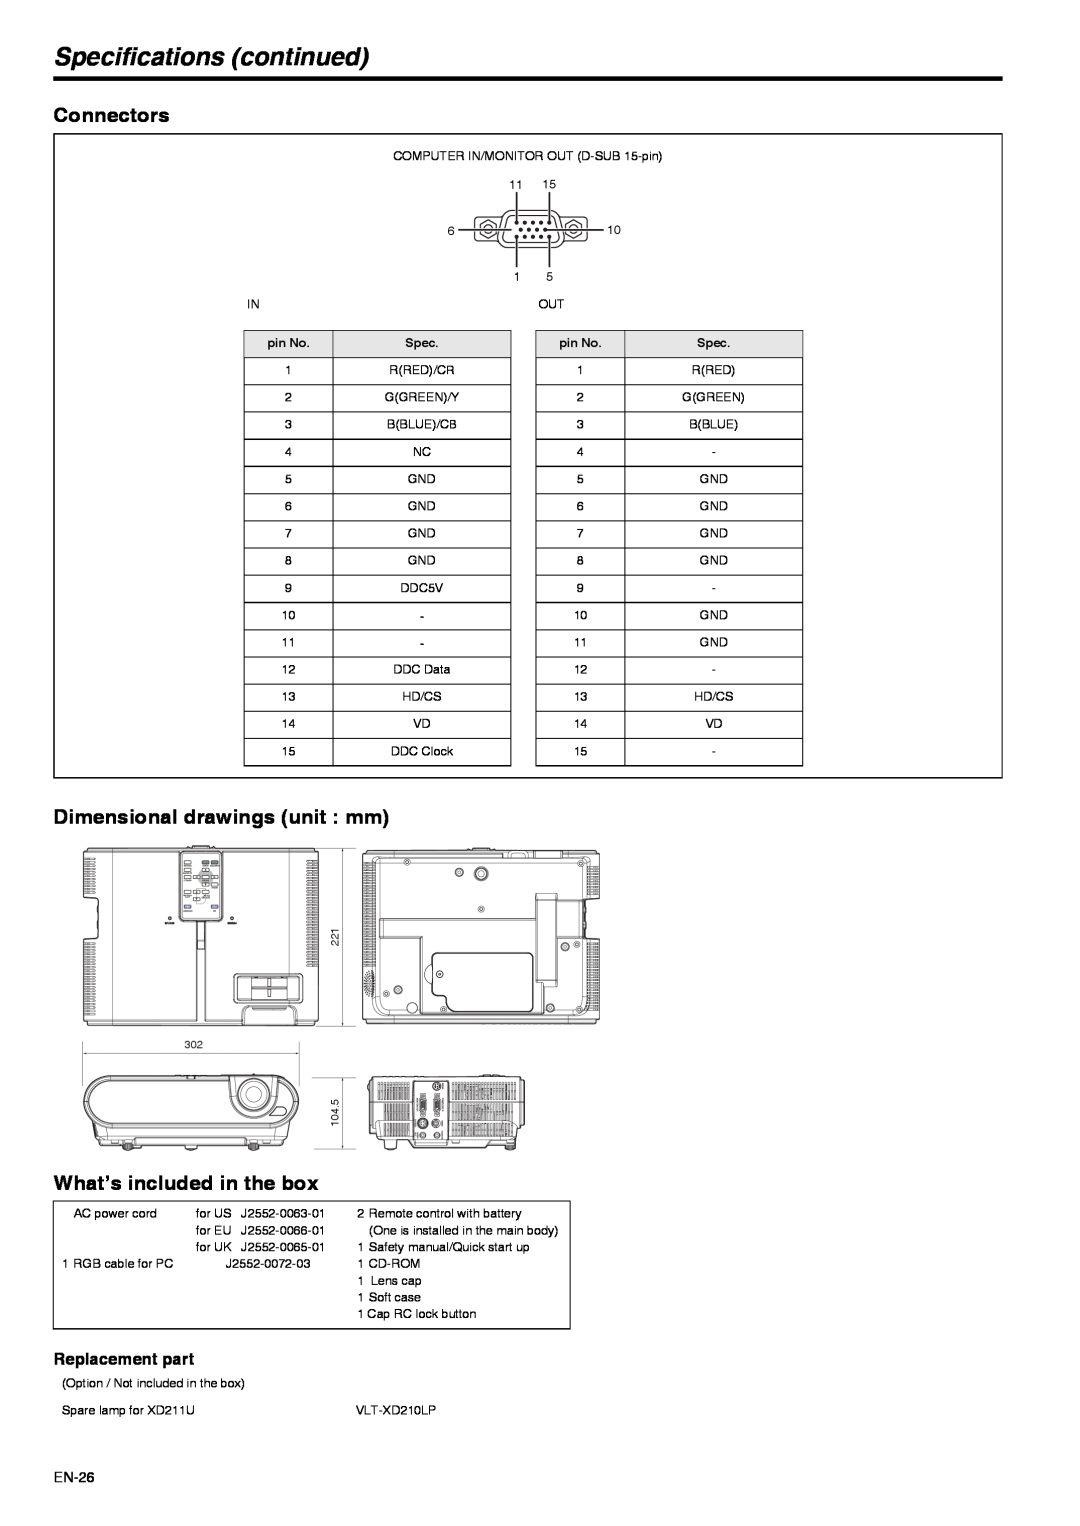 Mitsubishi Electronics XD211U Specifications continued, Connectors, Dimensional drawings unit mm, Replacement part 